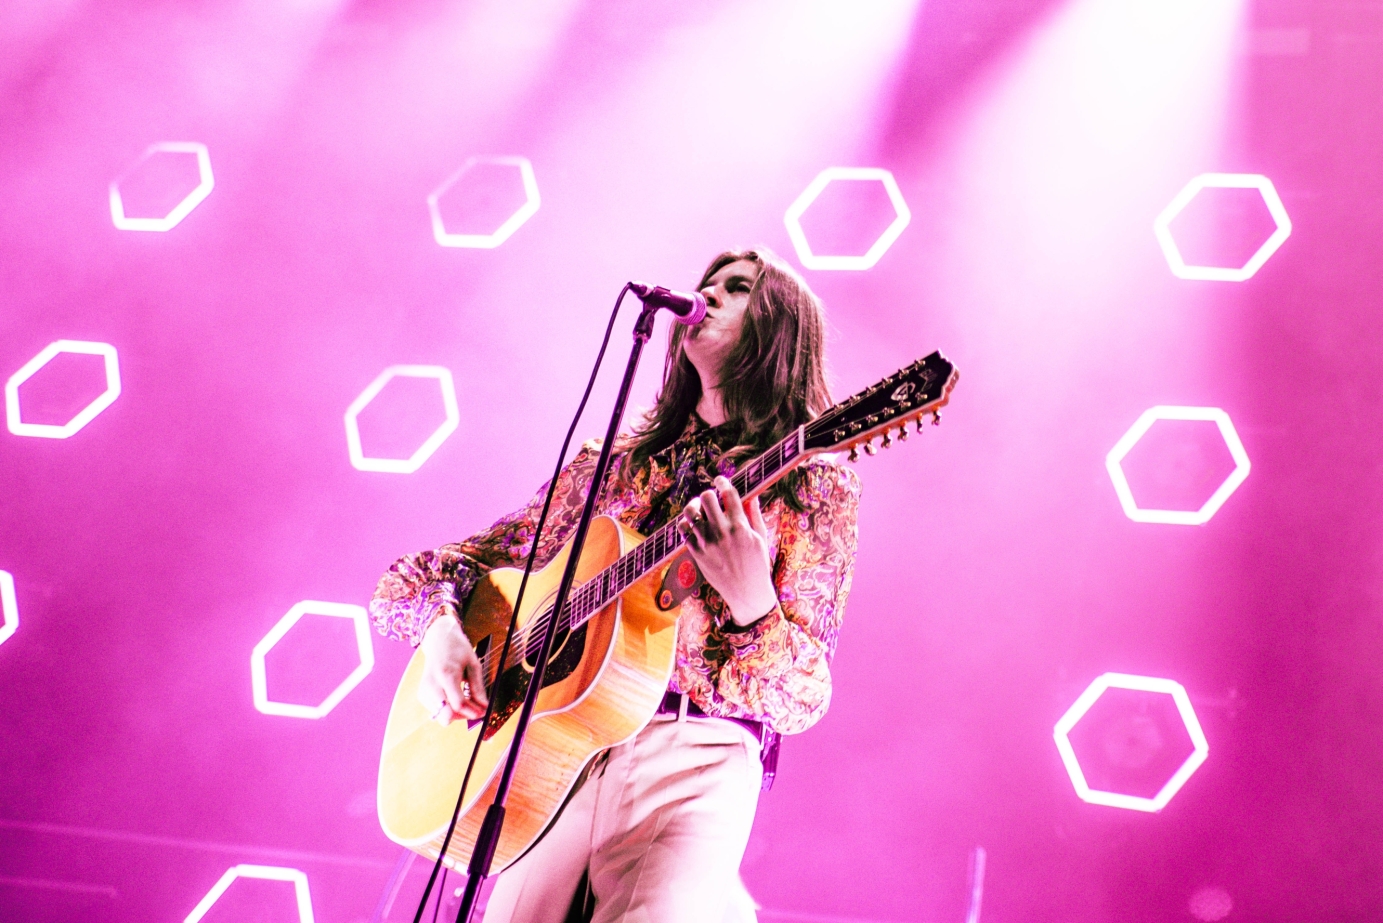 Blossoms performing live at the AO Arena in Manchester. Live music photography by Abbie Jennings